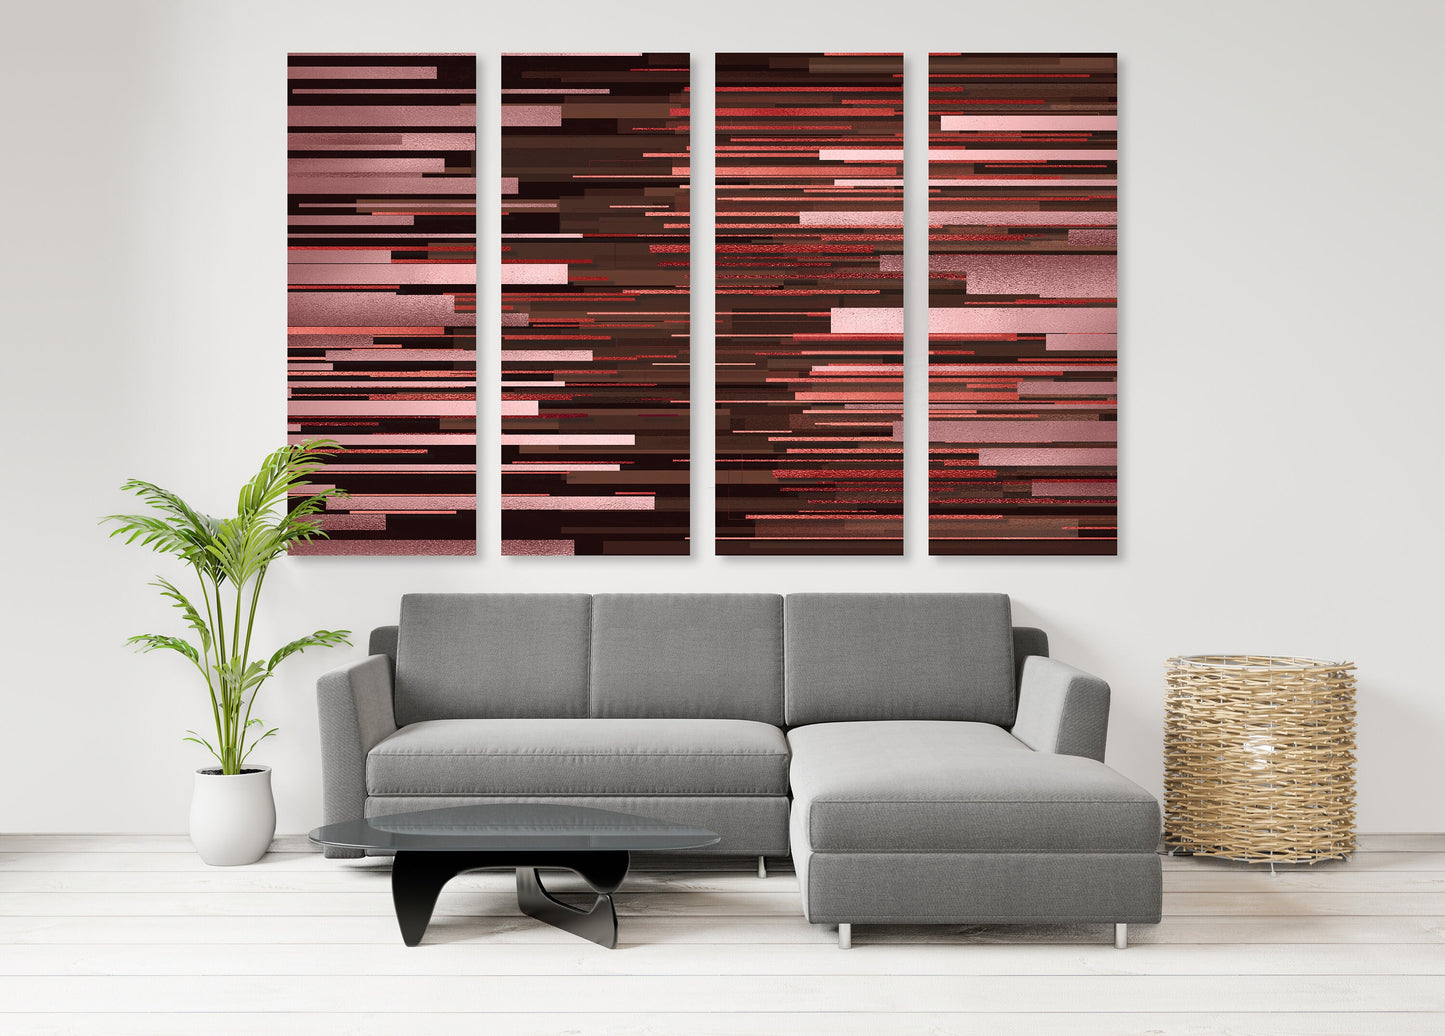 Abtract line extra large print canvas wall art, set of 3 red wall arts, modern abstract multi panel home wall decor, printable wall art